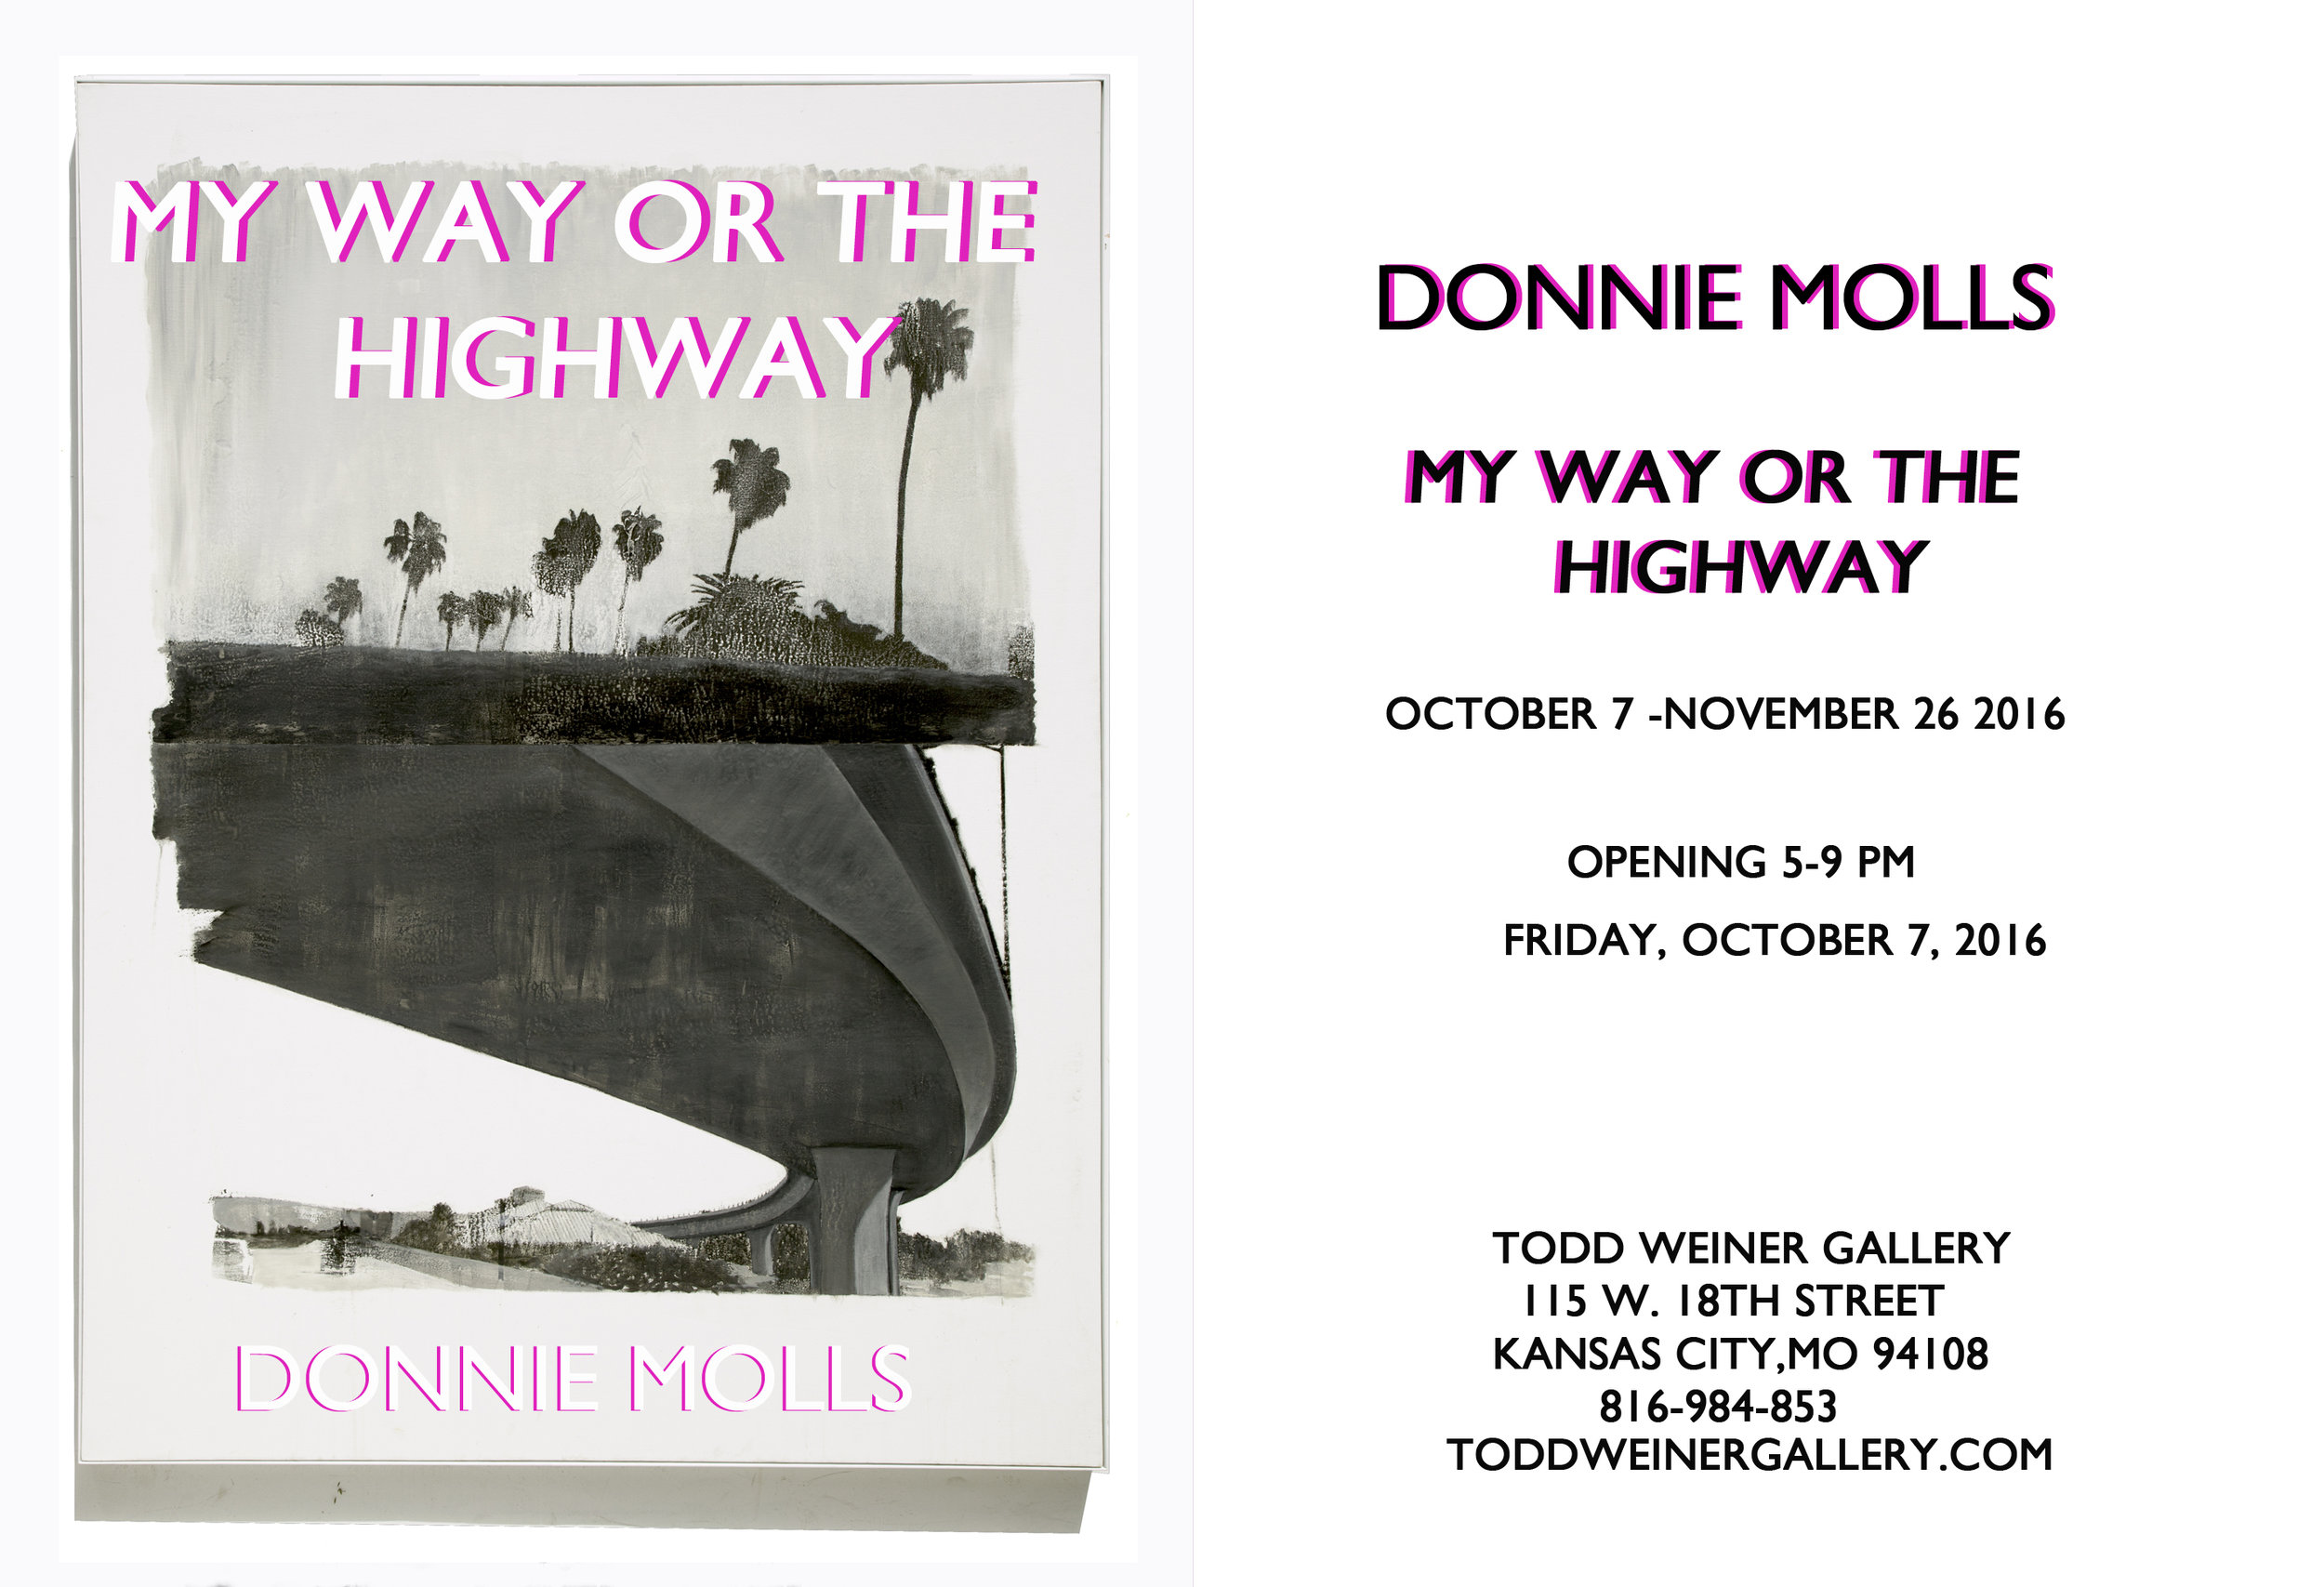 Donnie Molls - My Way or the Highway - October 2016